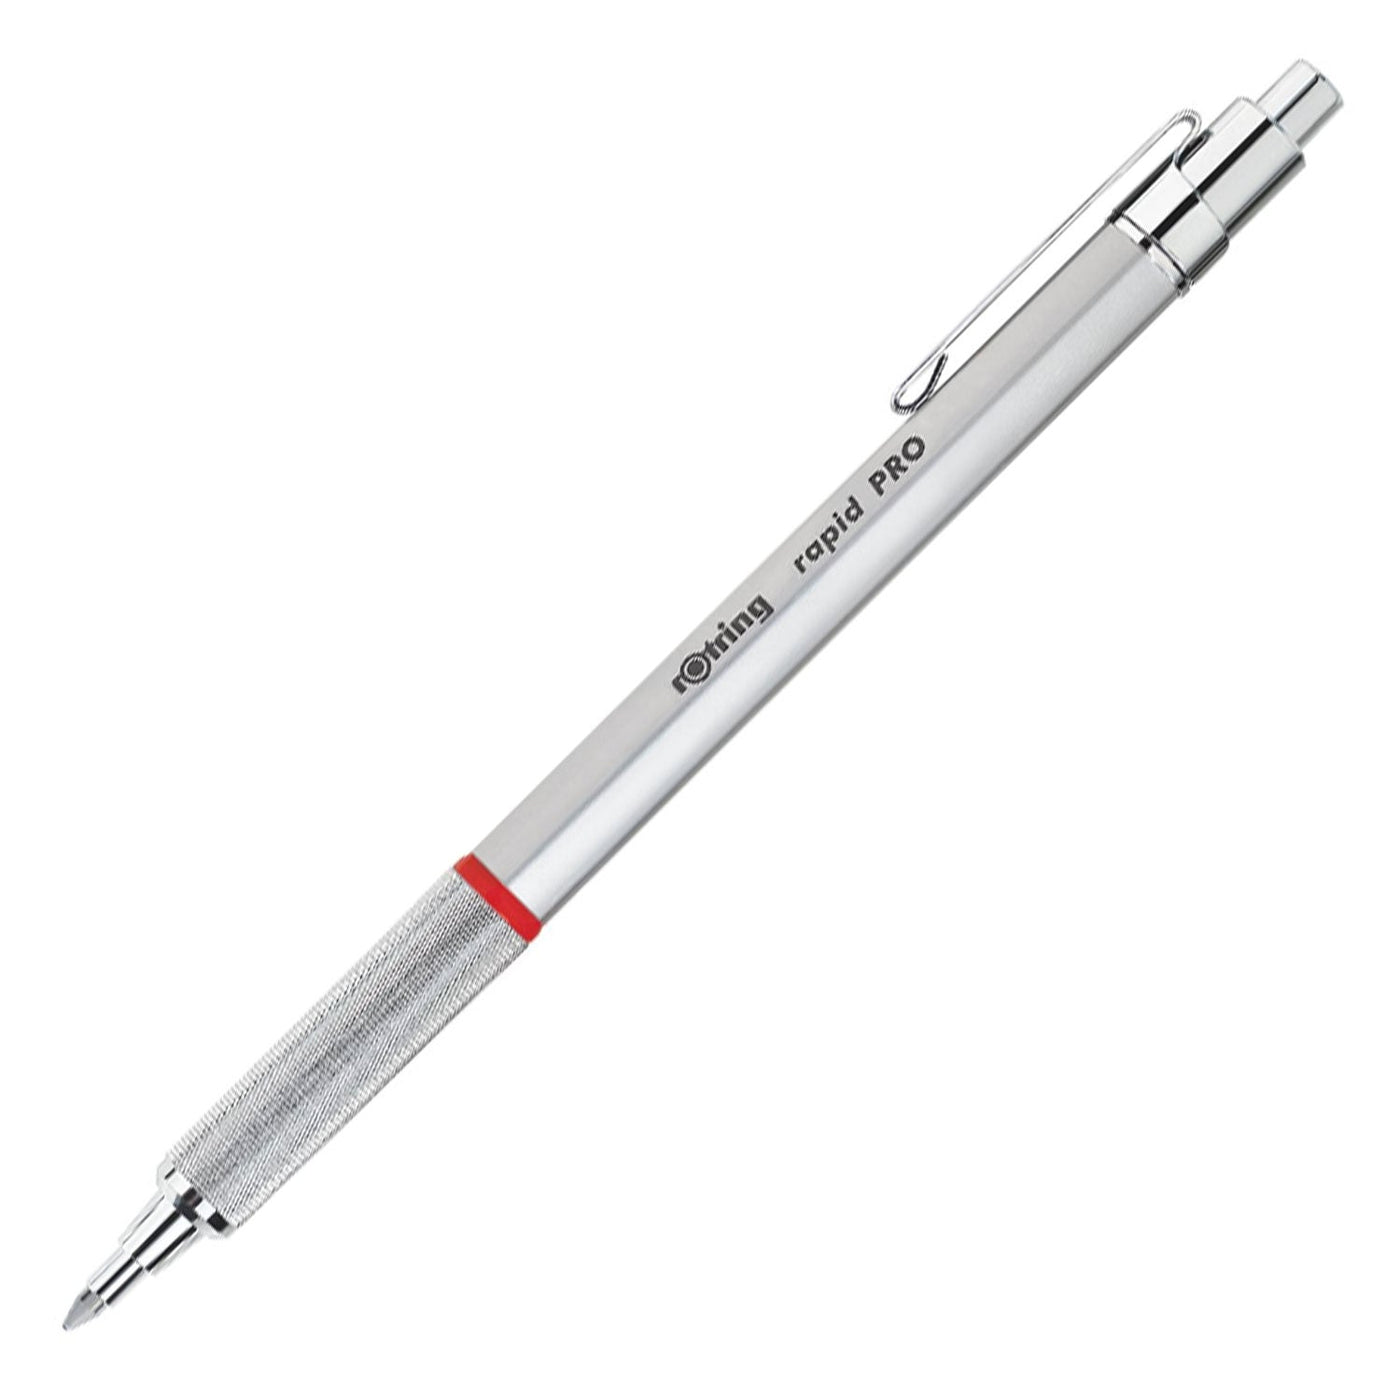 Rotring Rapid Pro 0.7mm Mechanical Pencil